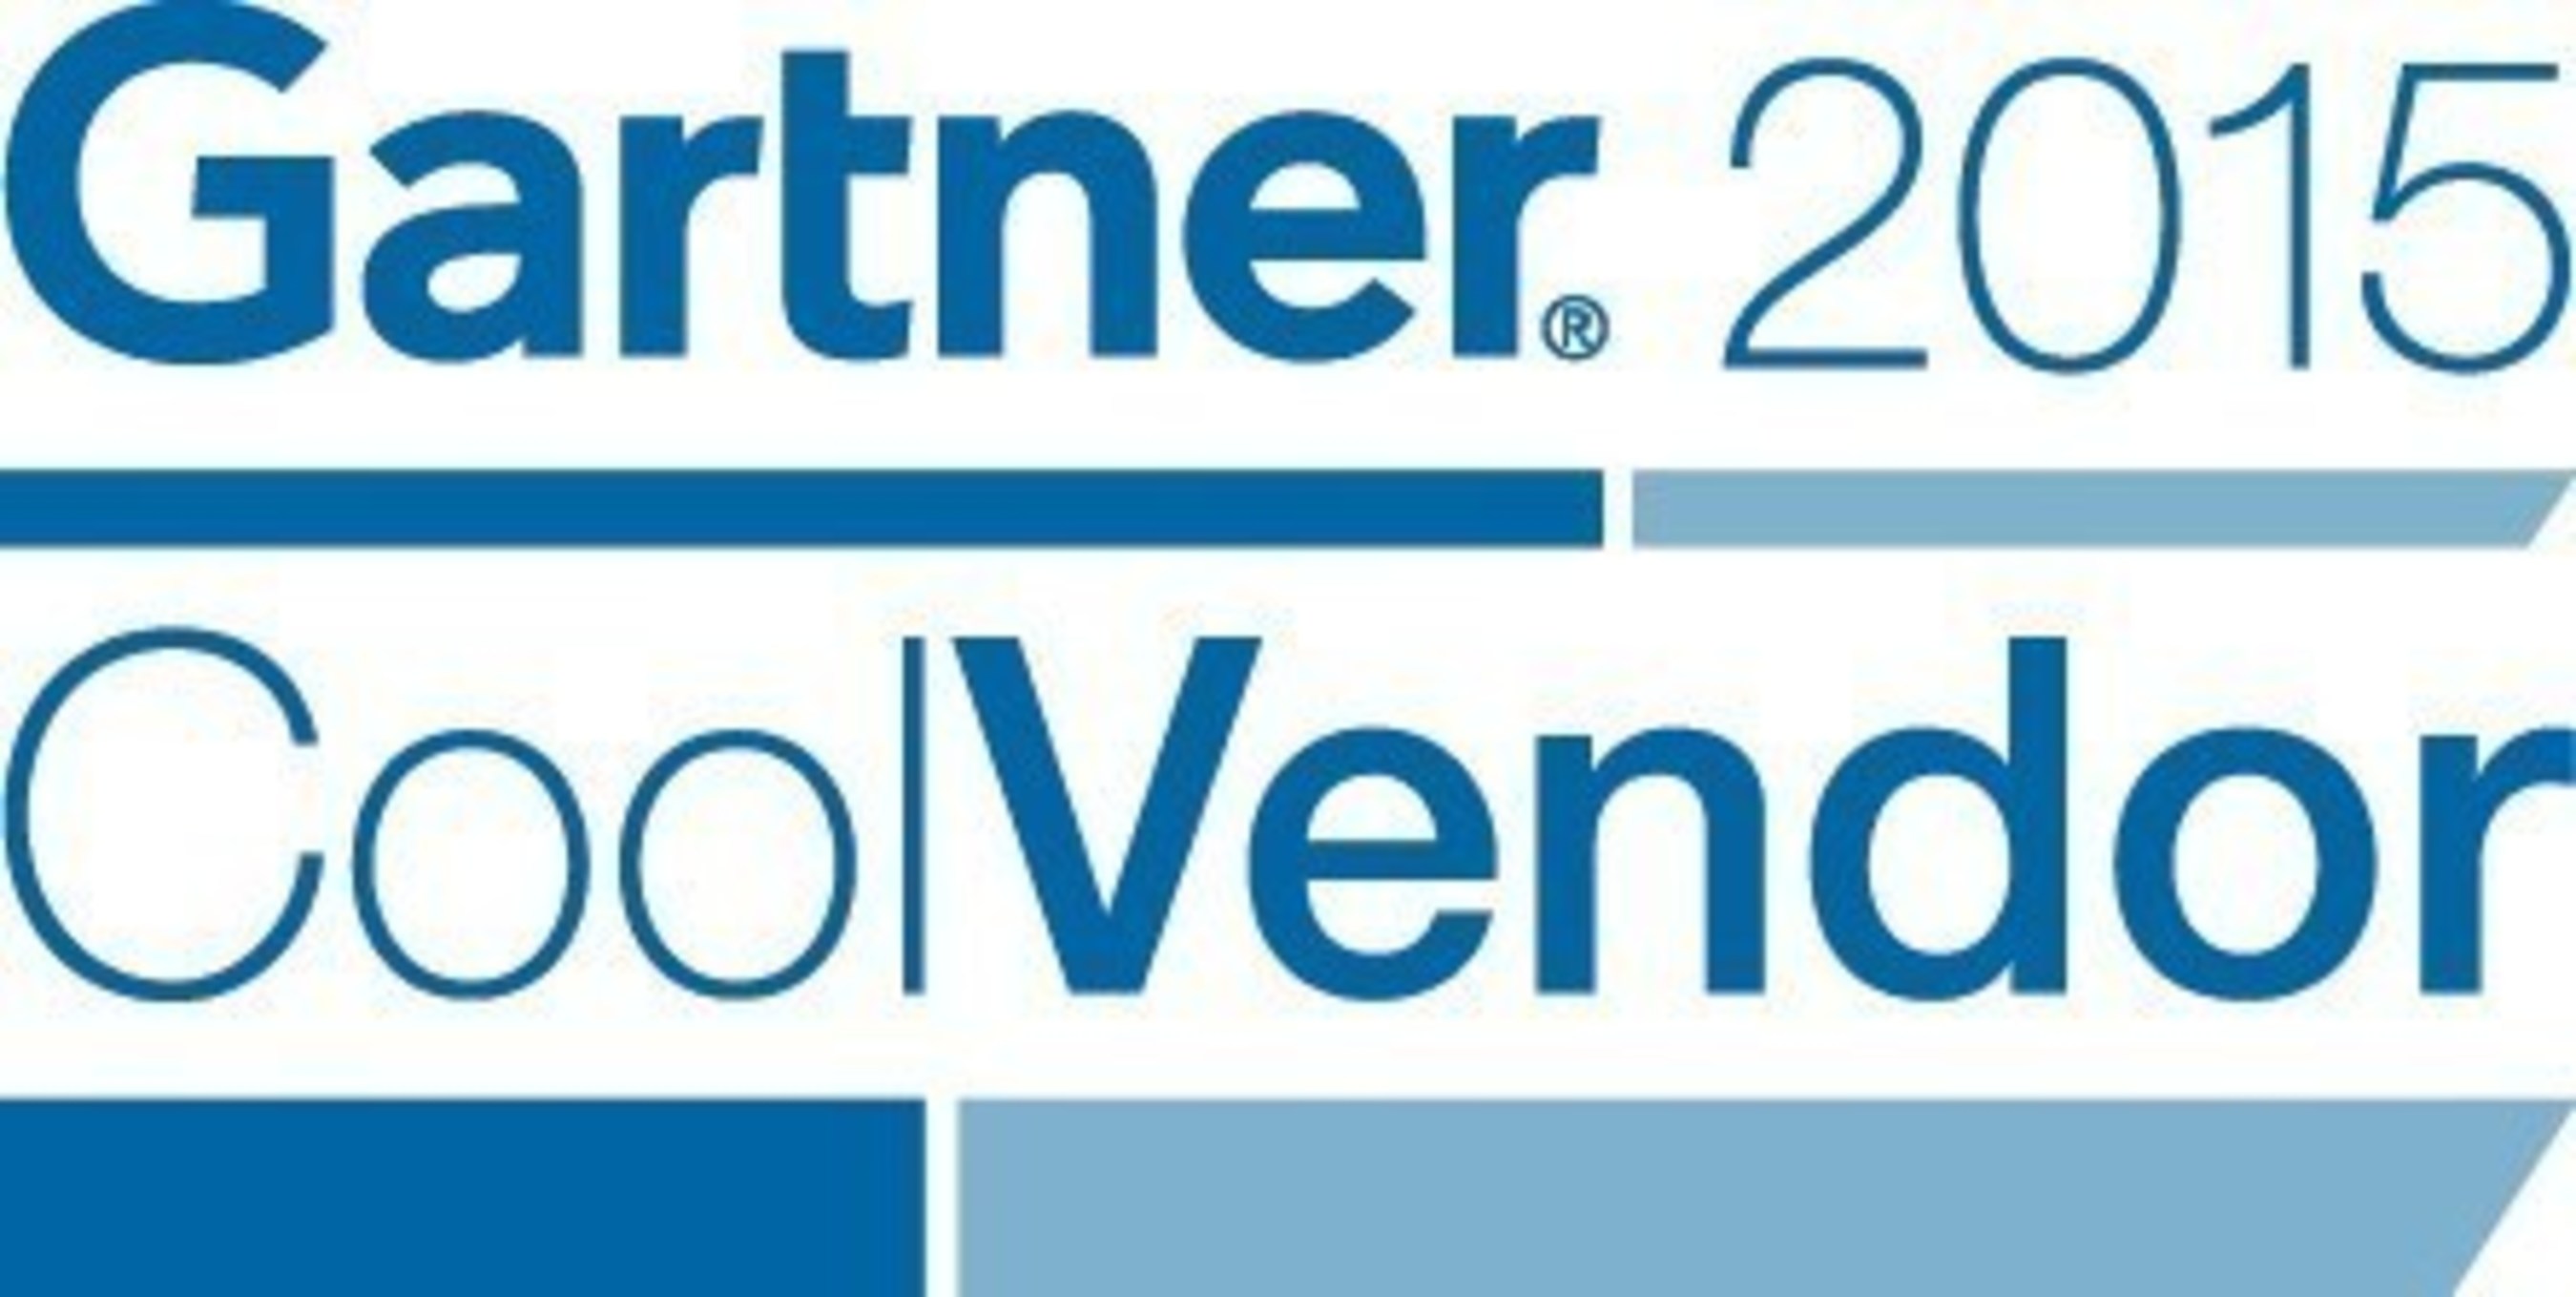 Elemental is named a "Cool Vendor" by Gartner in a report looking at the communications service providerinfrastructure market.